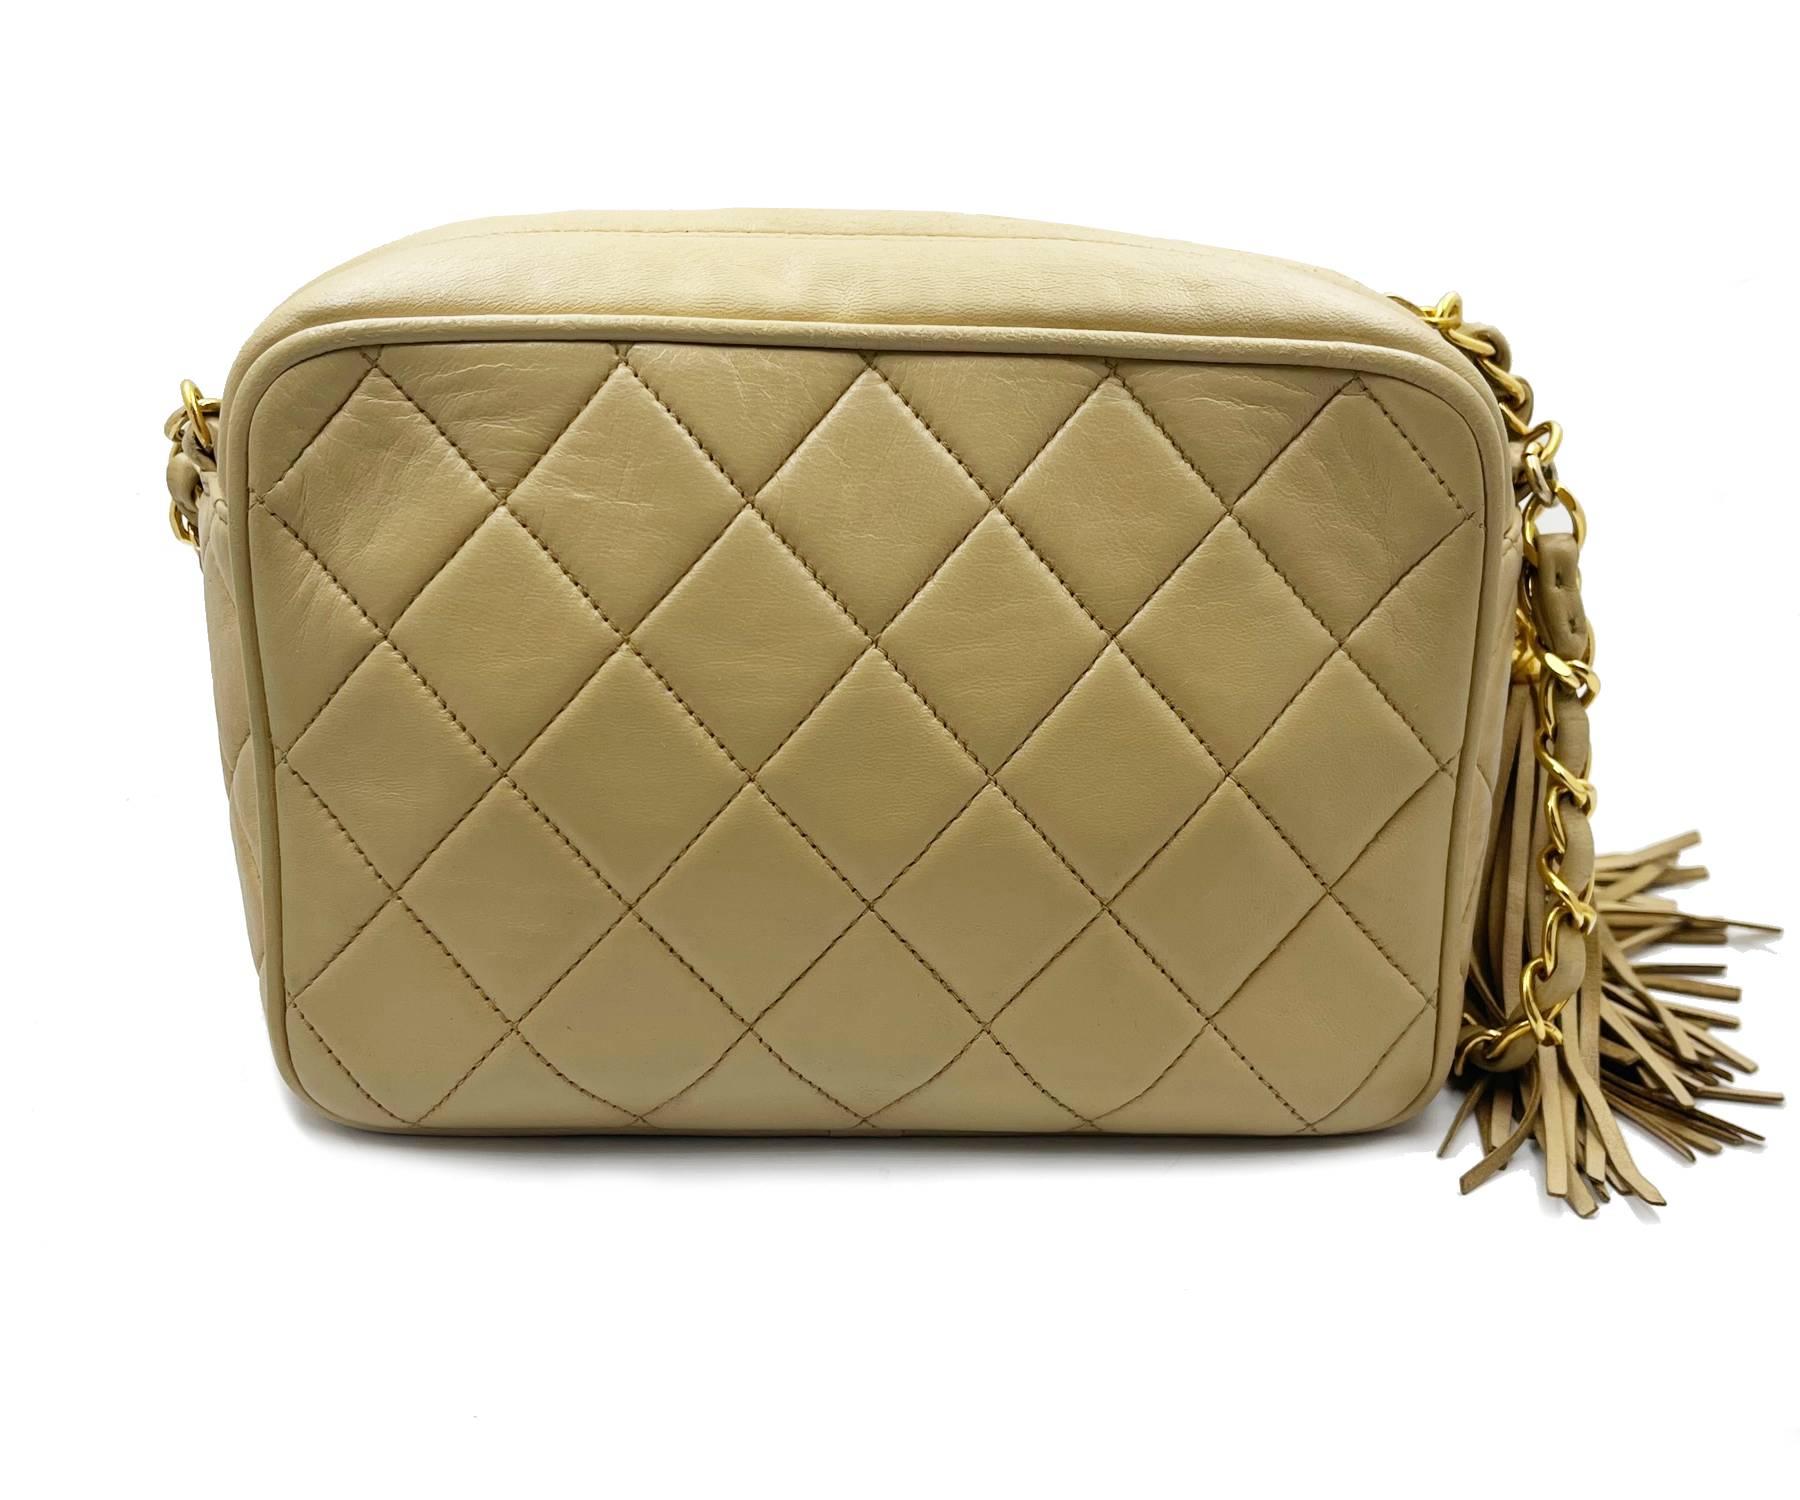 Chanel Vintage Beige Tassel Camera Small Cross Body Bag   In Good Condition For Sale In Pasadena, CA